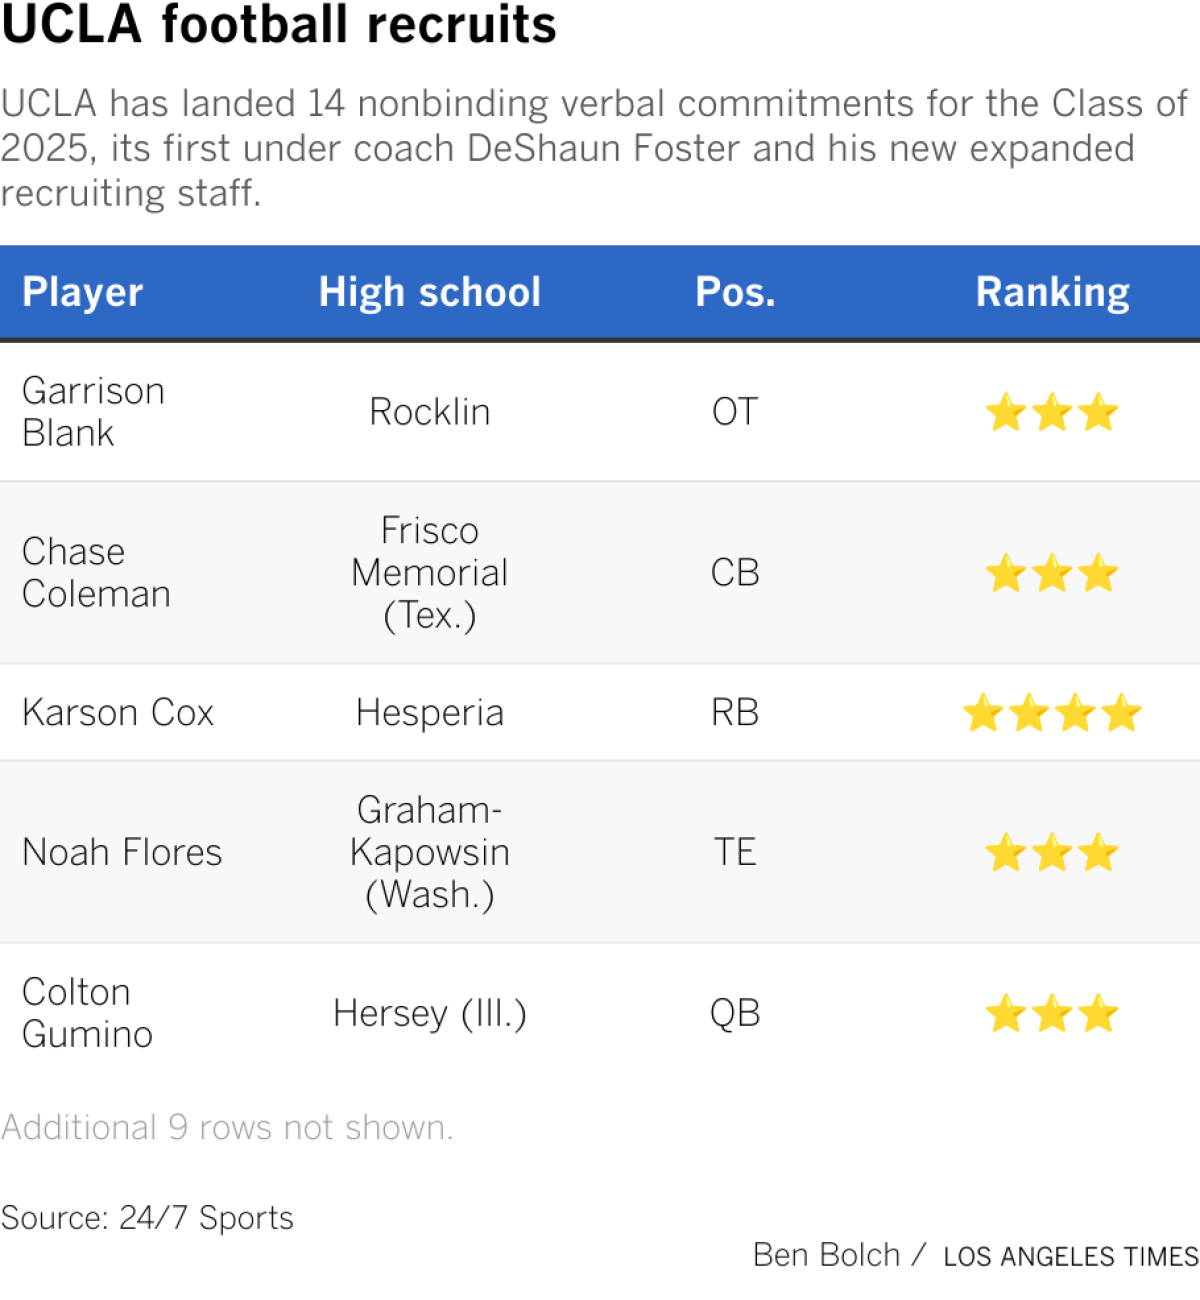 UCLA has landed 14 nonbinding verbal commitments for the Class of 2025, its first under coach DeShaun Foster and his new expanded recruiting staff.